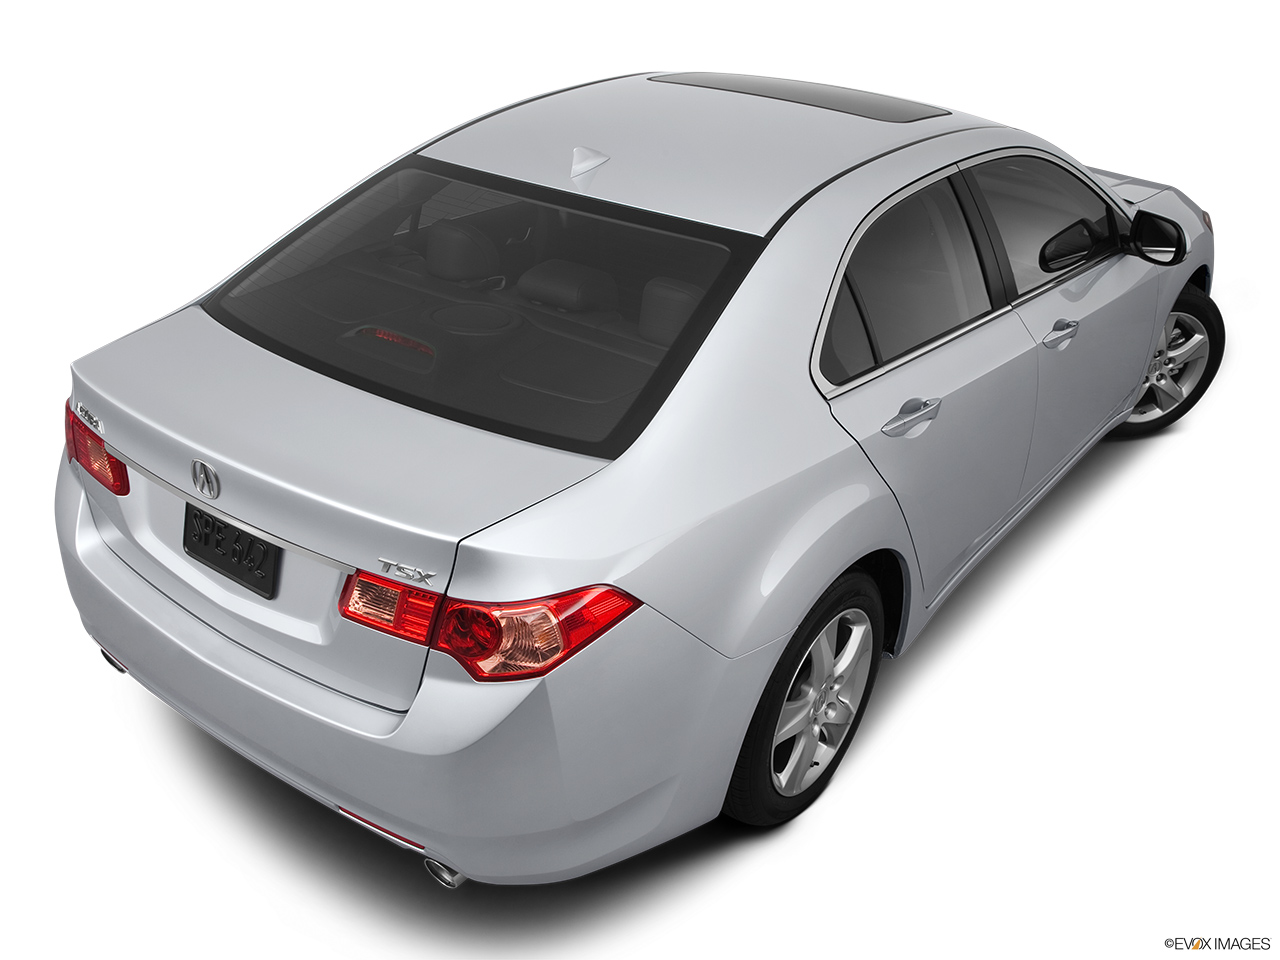 2012 Acura TSX 5-Speed Automatic Rear 3/4 angle view. 